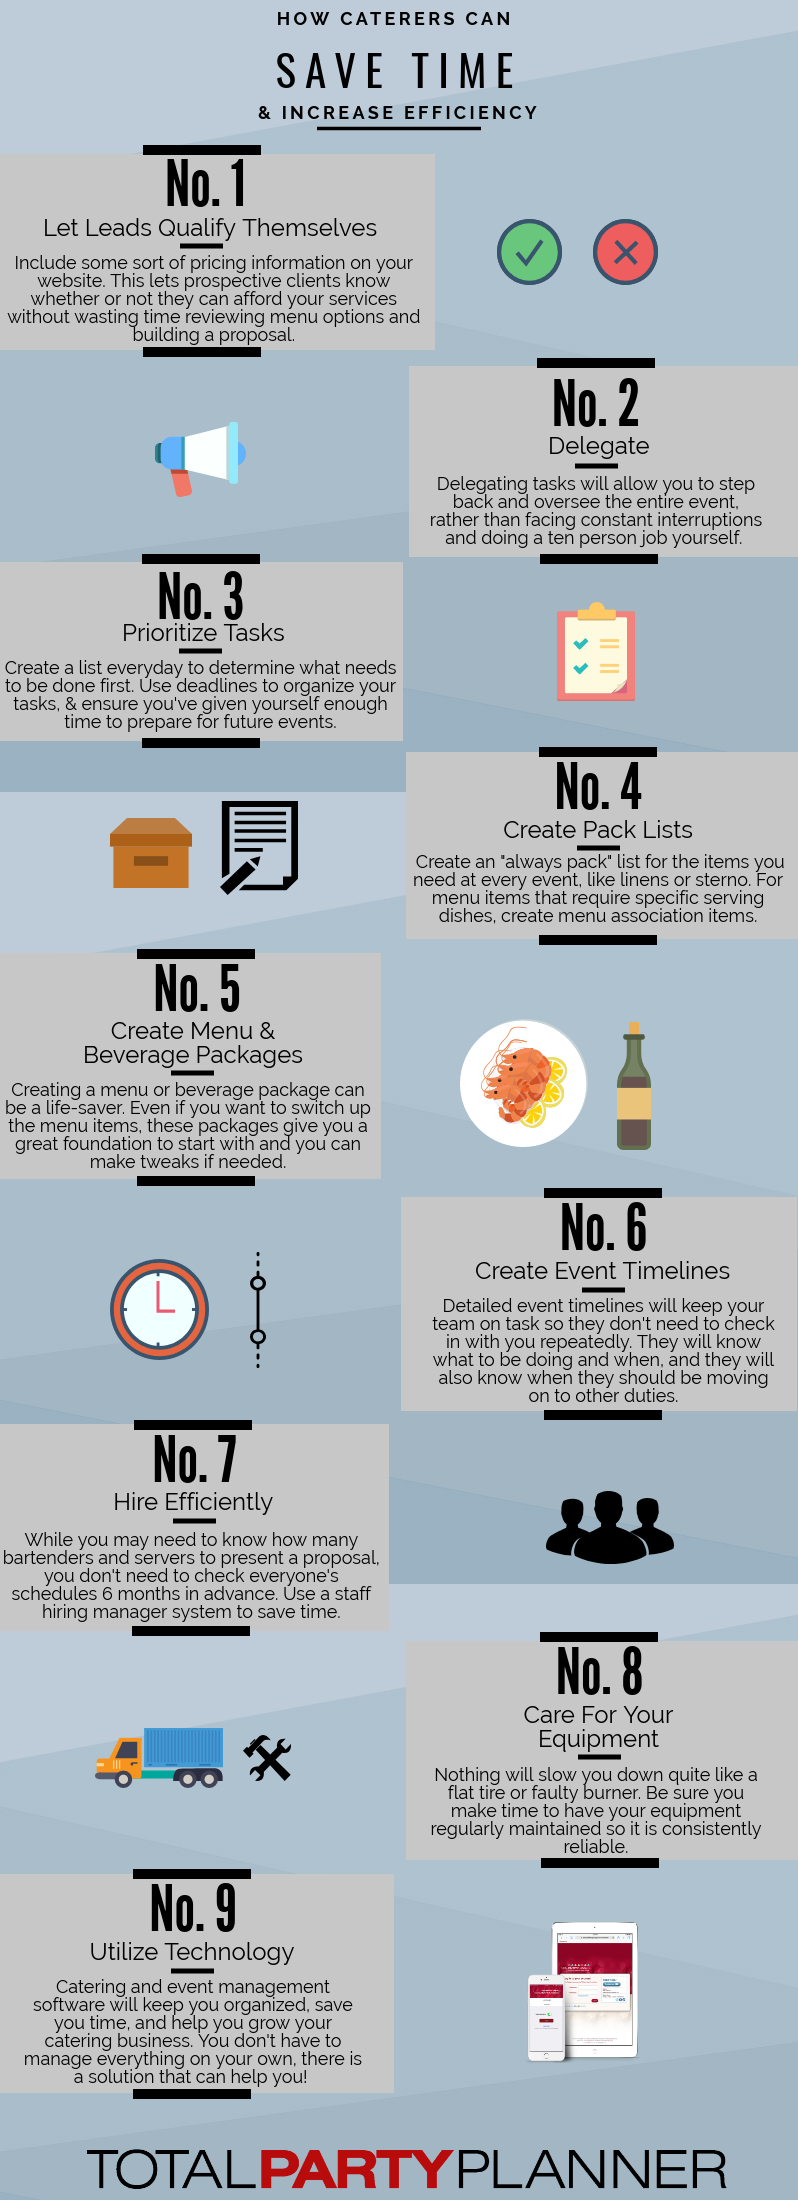 Infographic with 9 tips on how caterers can save time and increase efficiency.